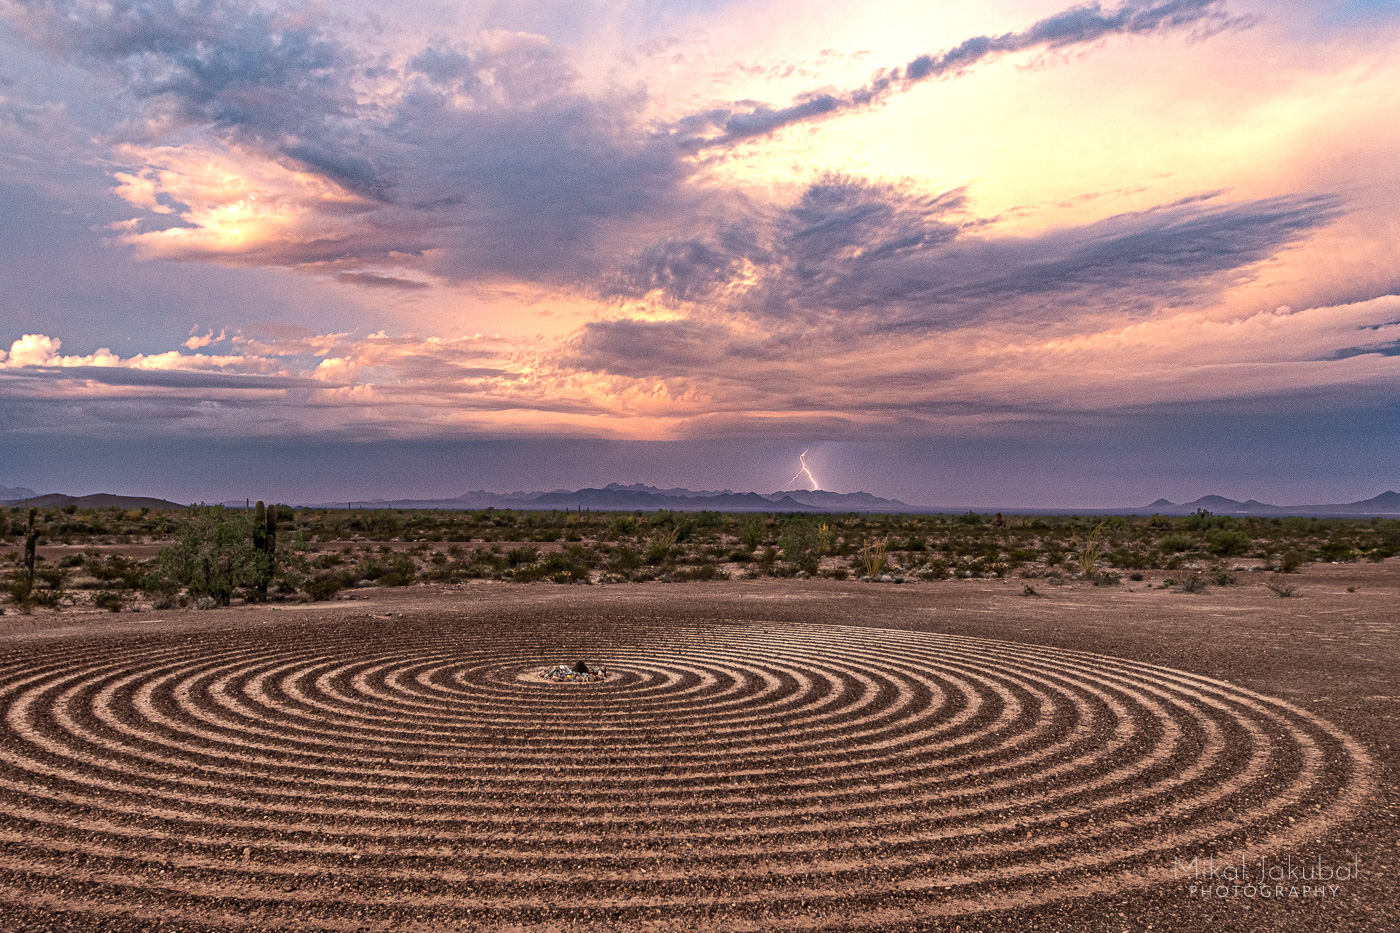 In the foreground, the Spiral Labyrinth forms a 60-foot diameter circle of tight concentric rings alternating between dark gravel piled into ridges and the lighter soil exposed beneath. In the background, bright orange and purple sunrise clouds are punctuated by a single bolt of lightning on the far horizon.